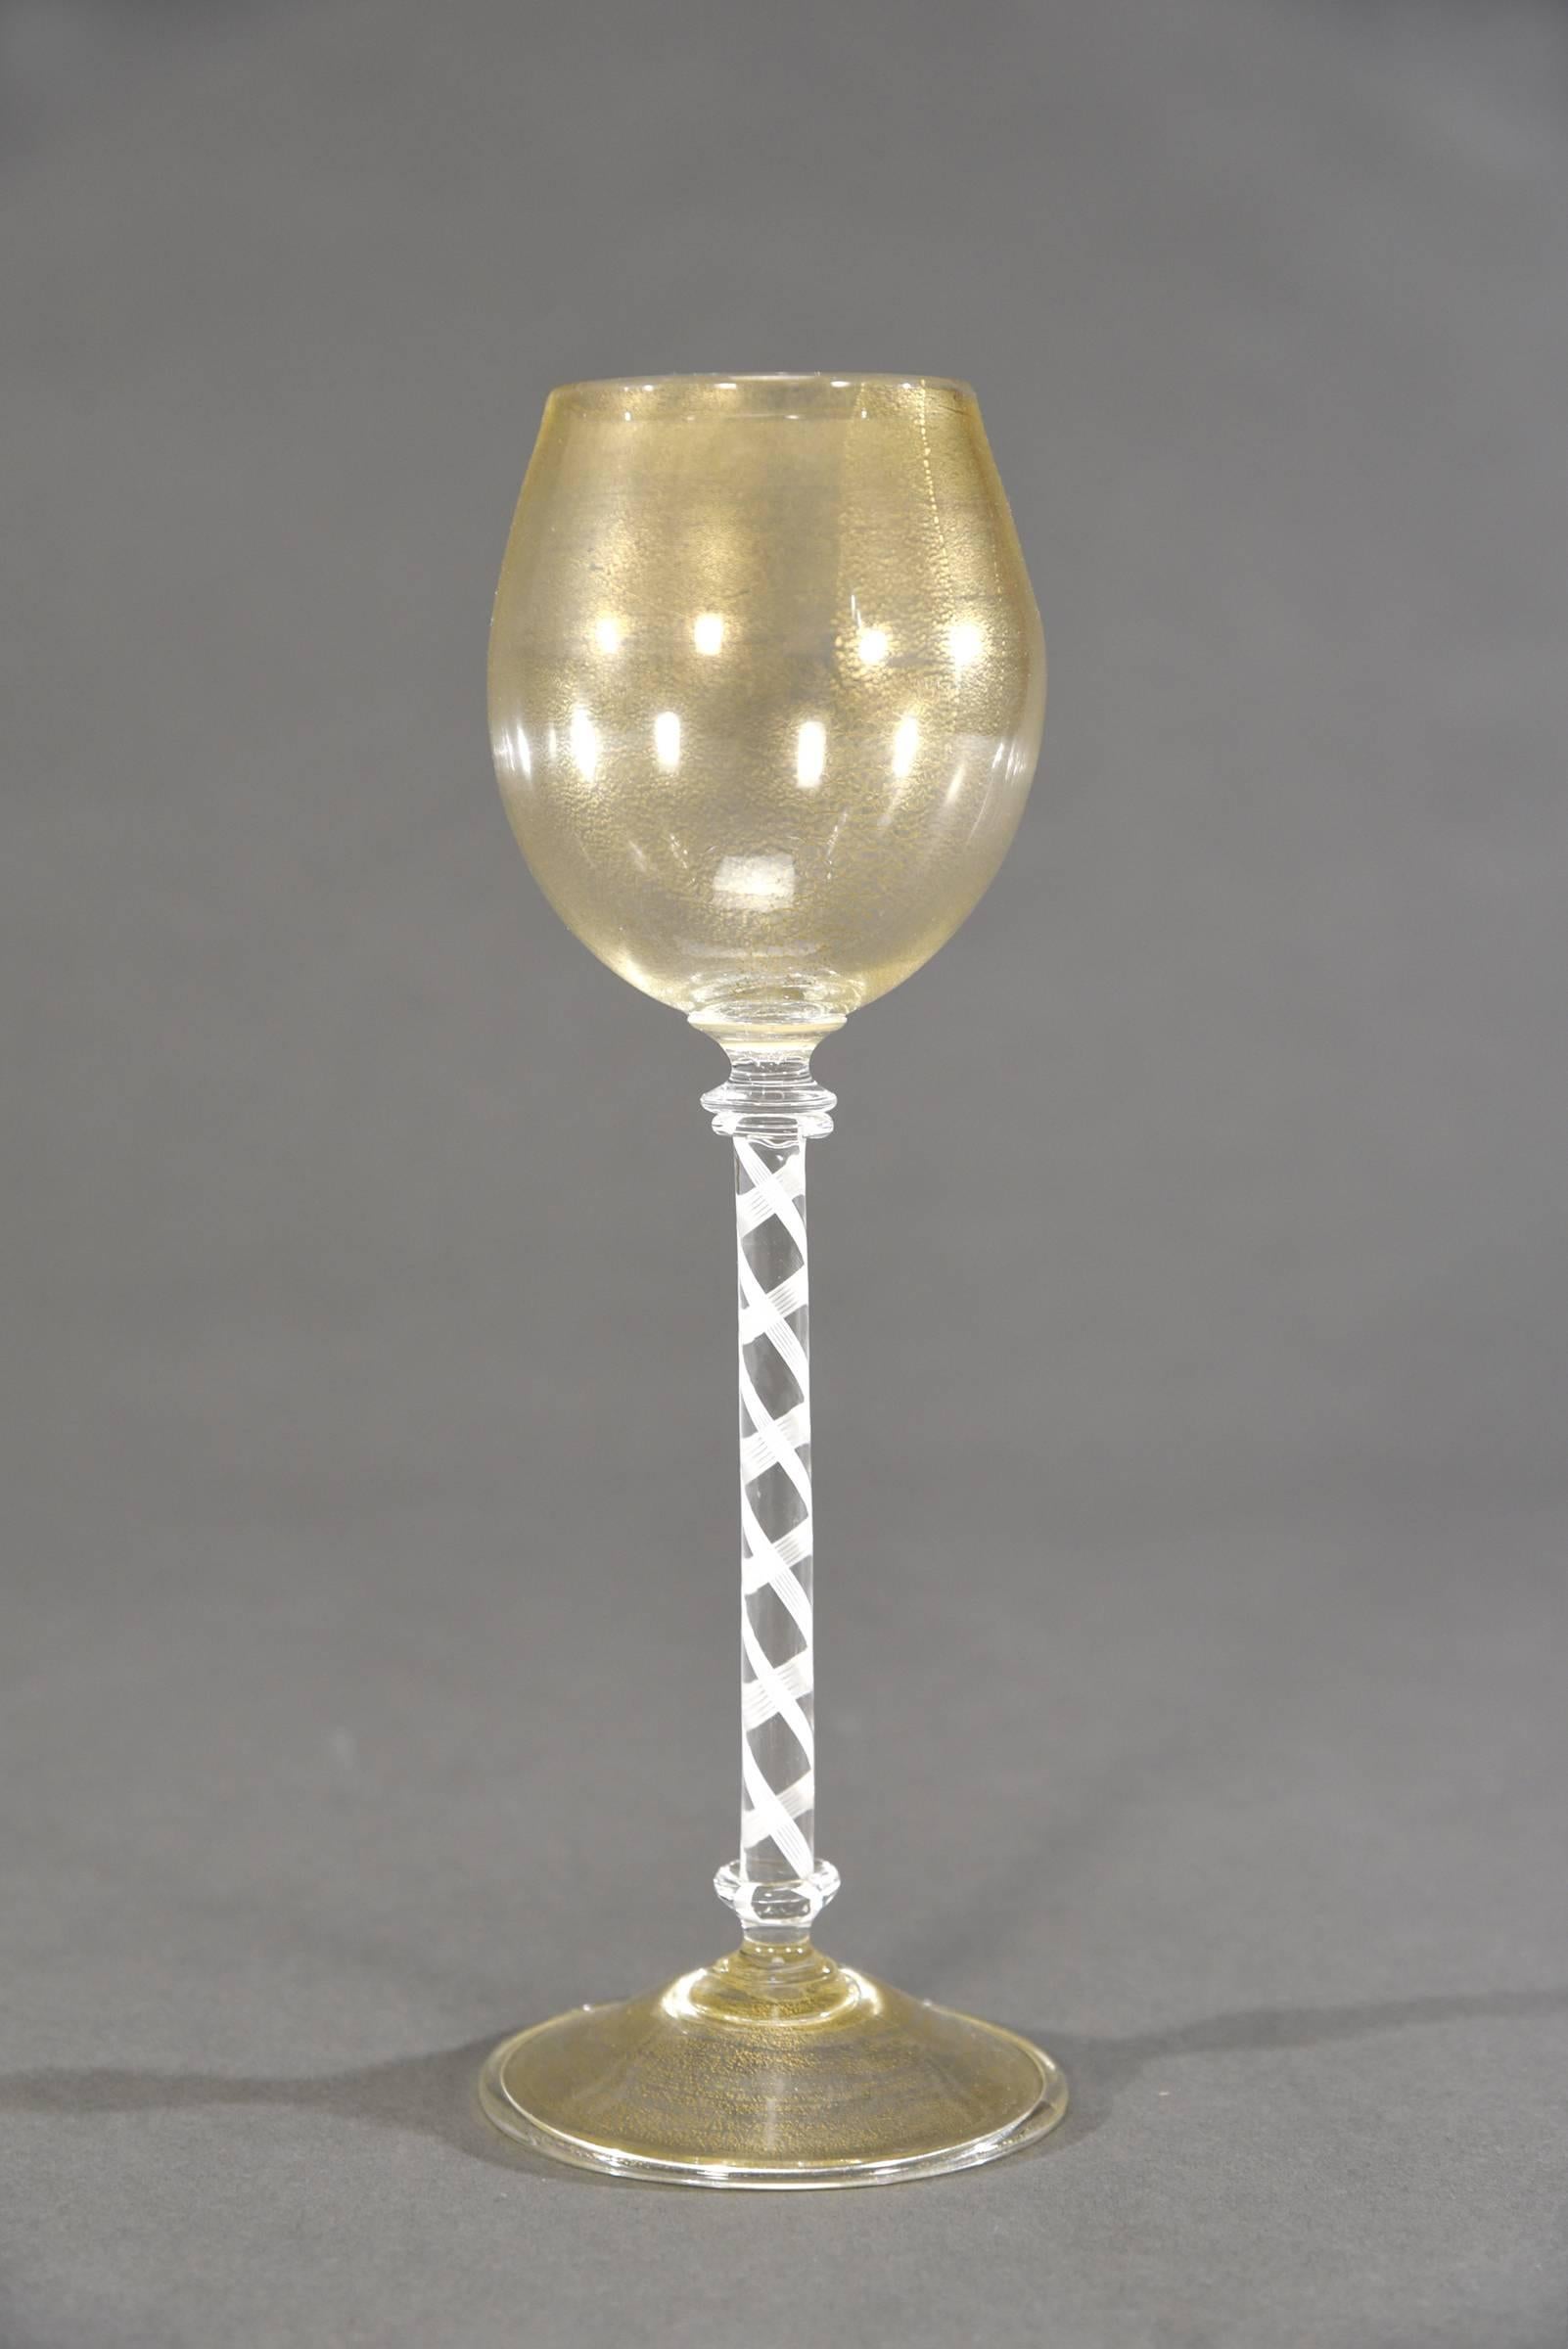 12 Venetian Goblets w/ White Cane Twist Stems & Gold Inclusions For Sale 1